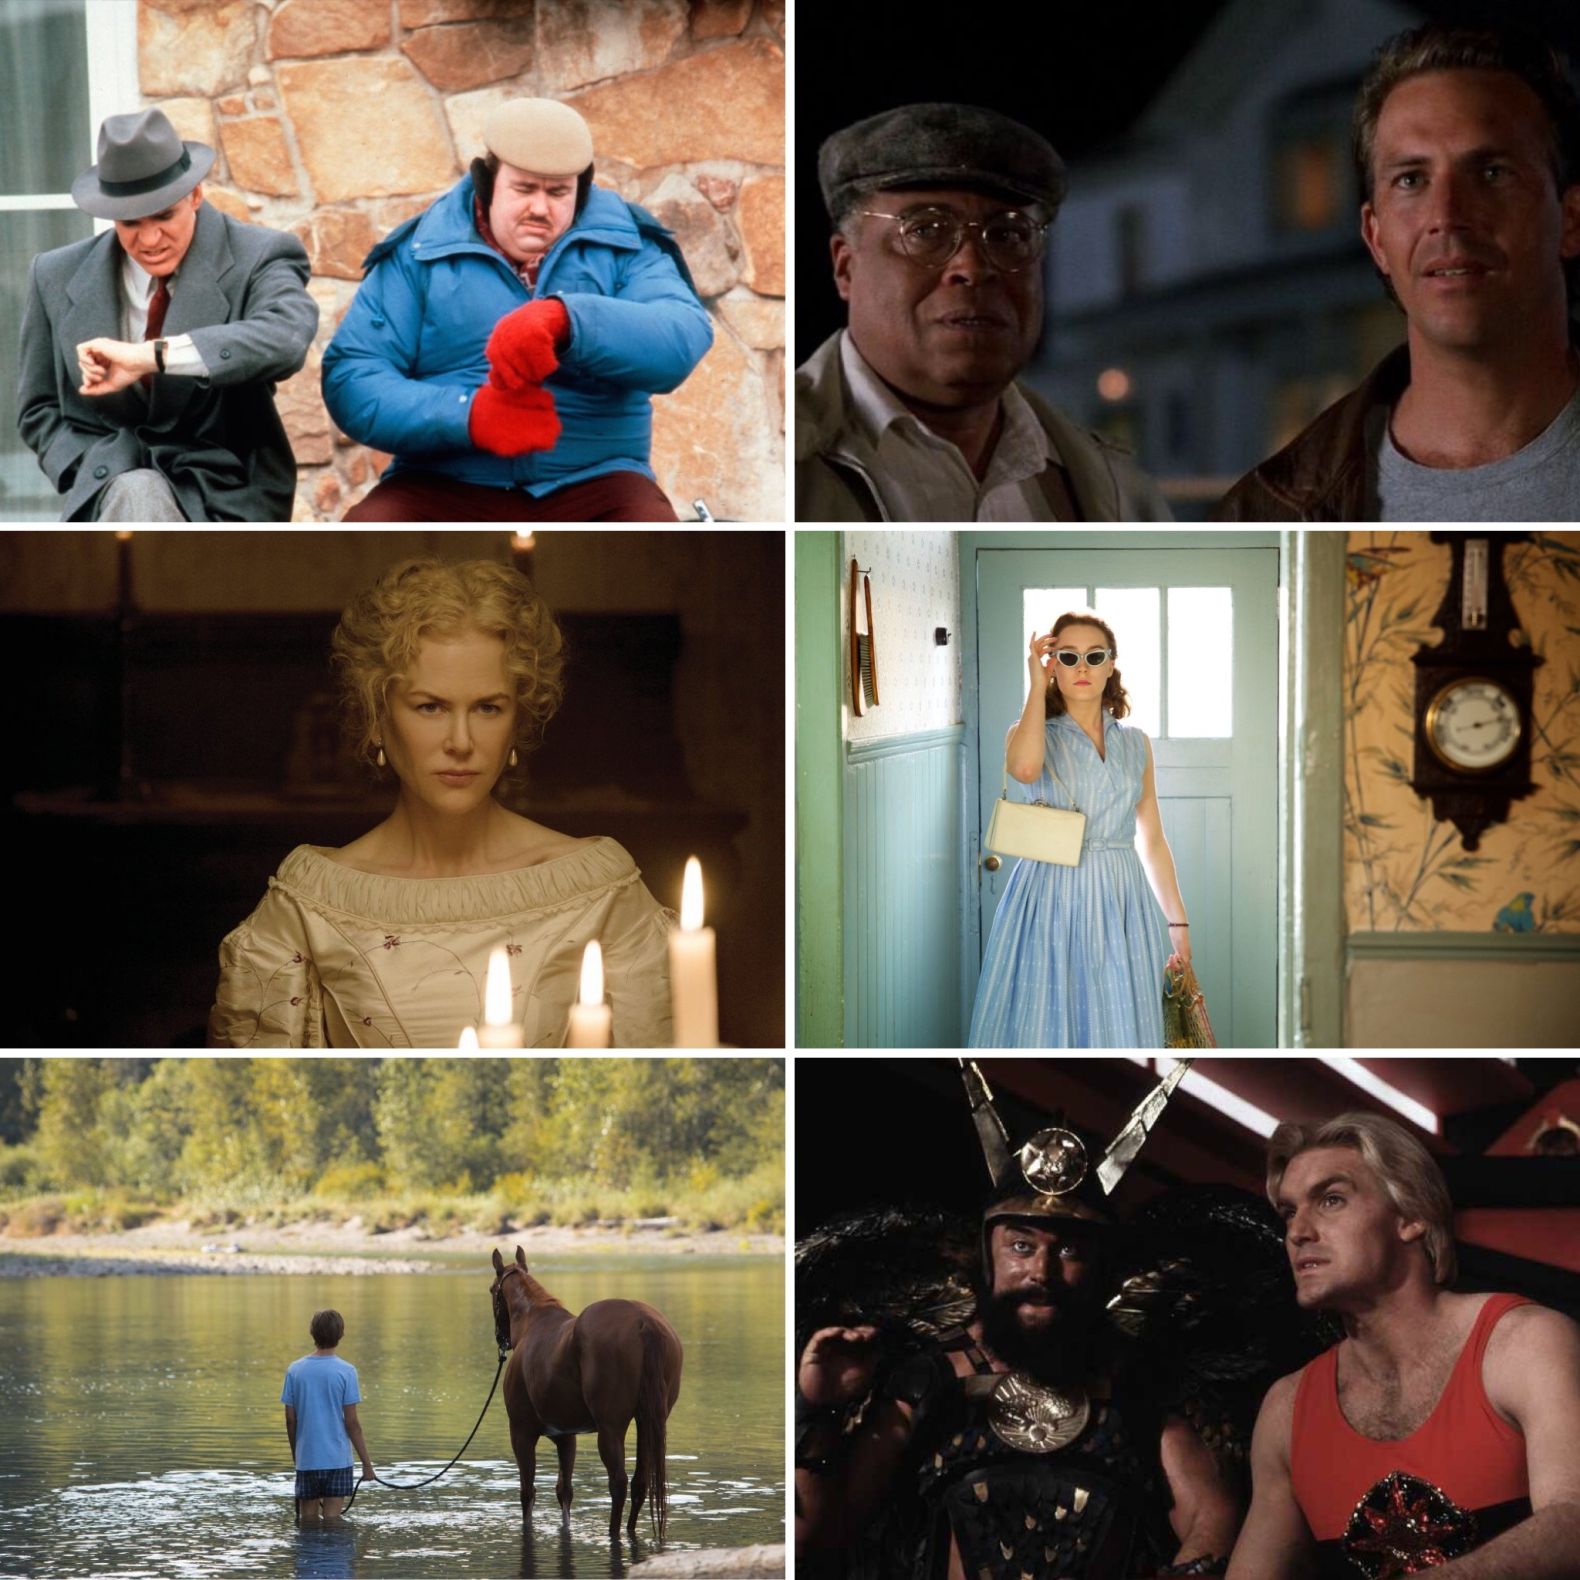 Duke Box #38: Our Guide to the Best Films on TV